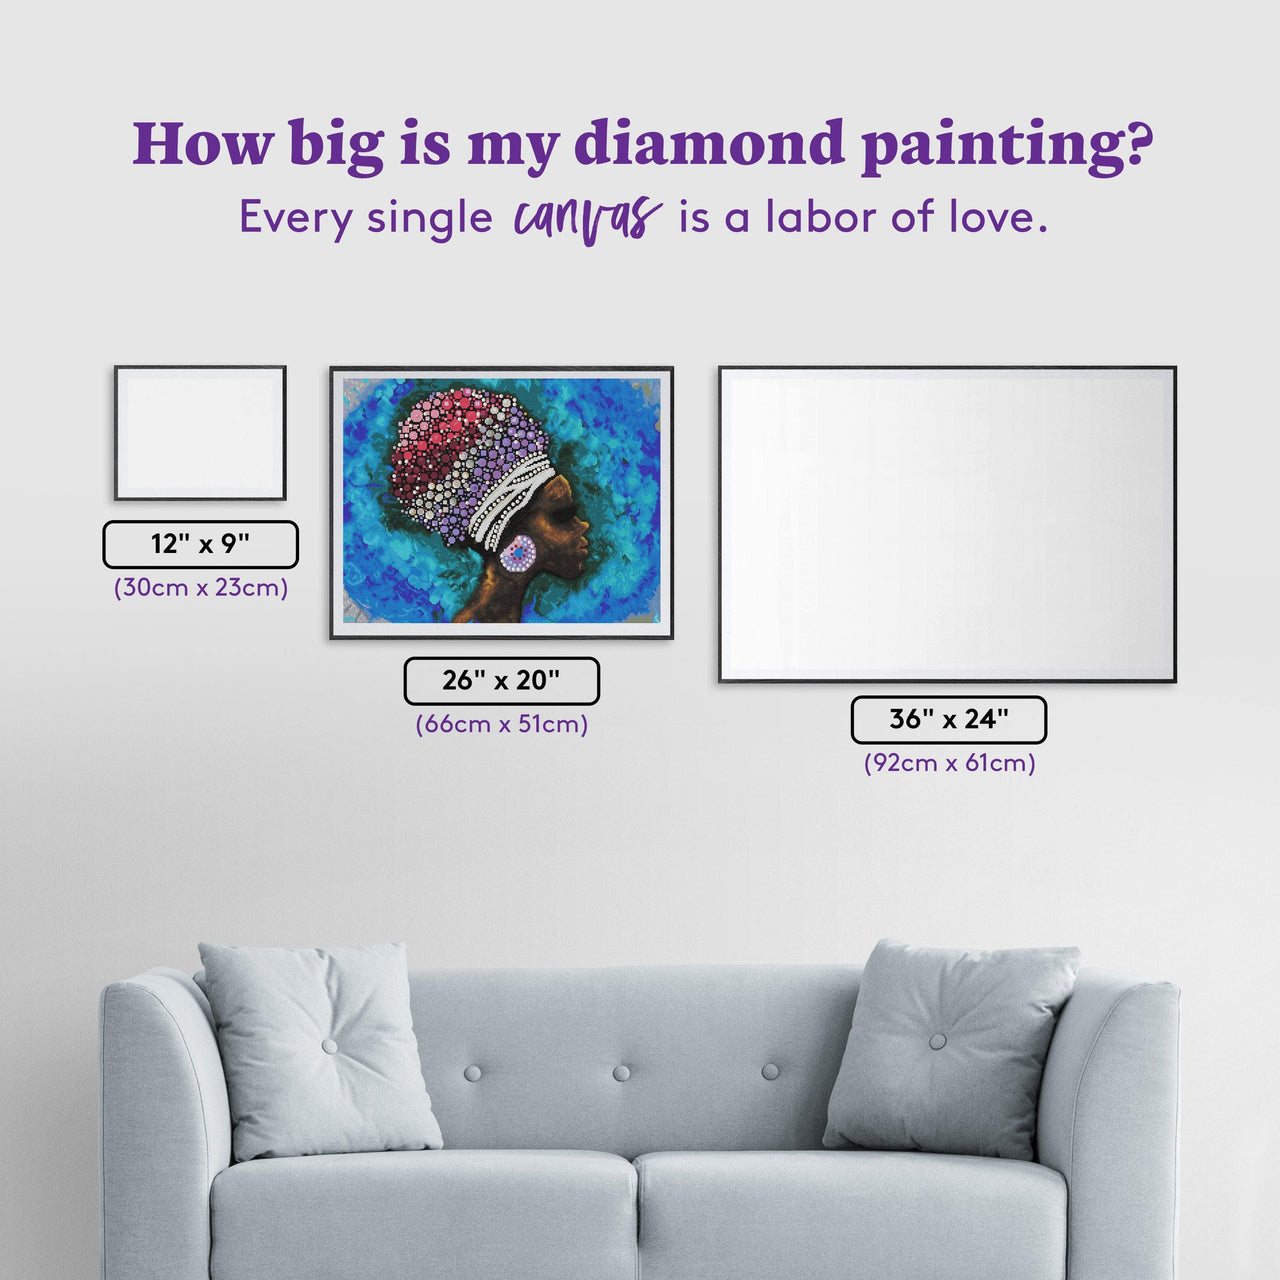 Diamond Painting The Gaze 26" x 20" (66cm x 51cm) / Round with 46 Colors including 3 ABs and 1 Special Diamond / 42,091